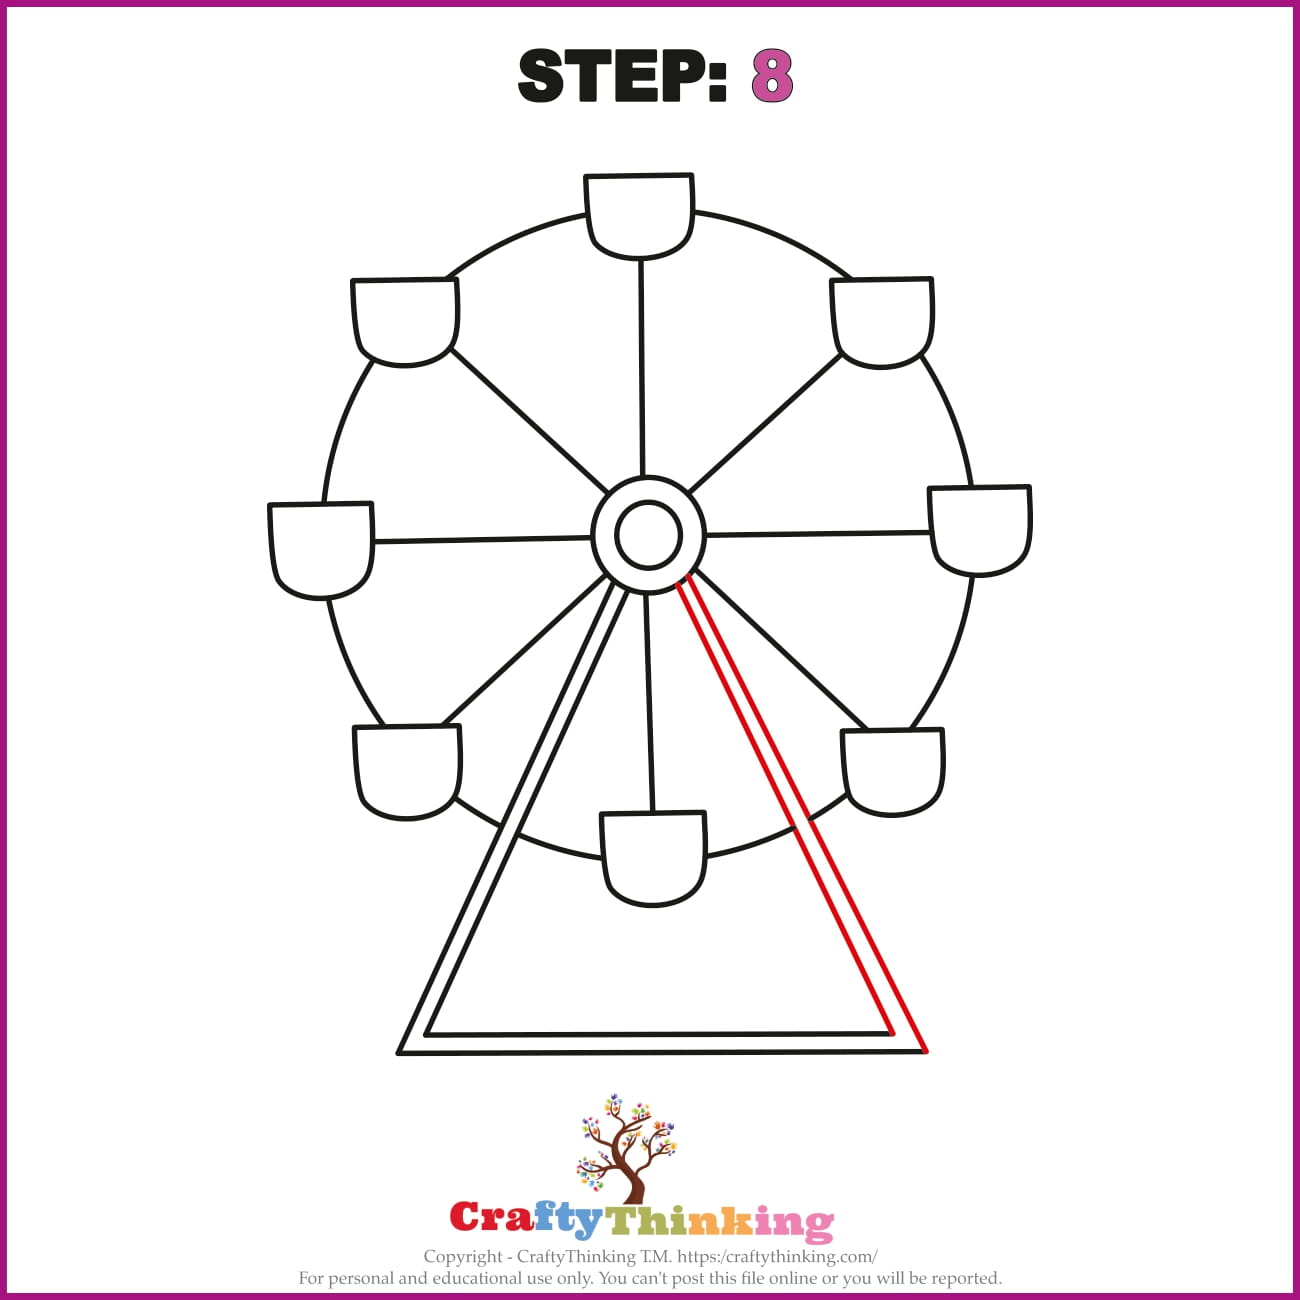 How to Draw a Ferris Wheel Step by Step with Free Ferris Wheel Template